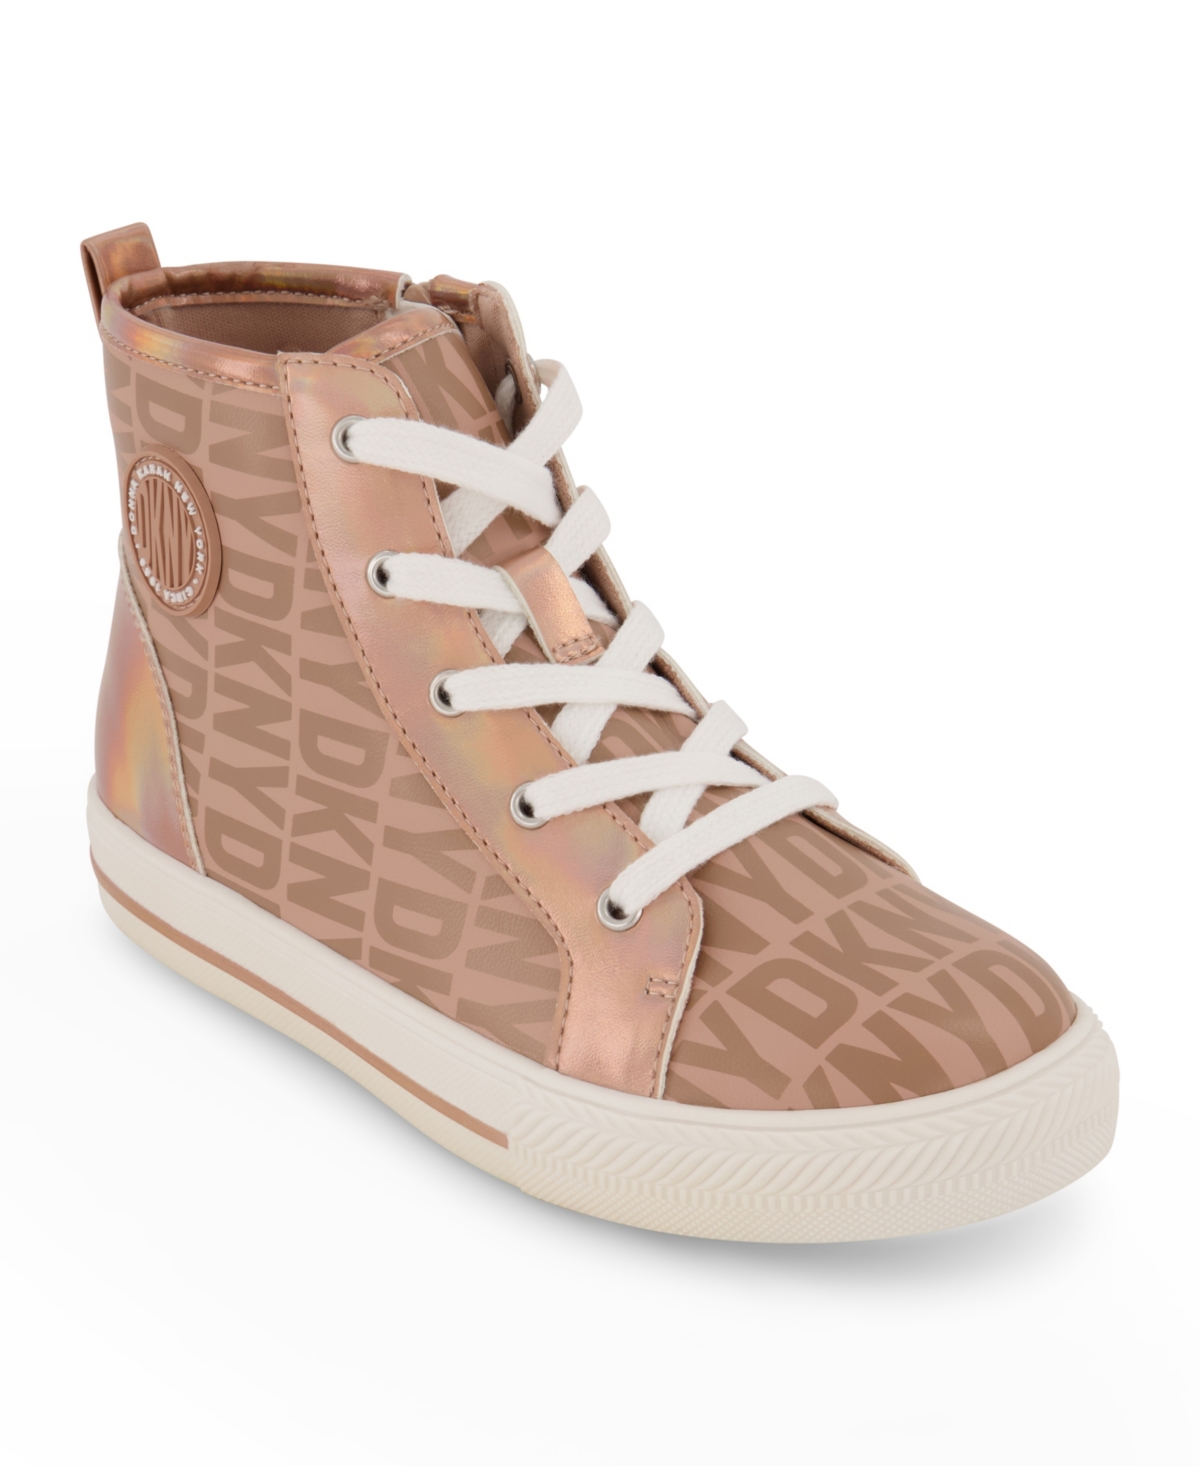 DKNY LITTLE GIRLS ALL OVER LOGO HIGH TOP SNEAKERS